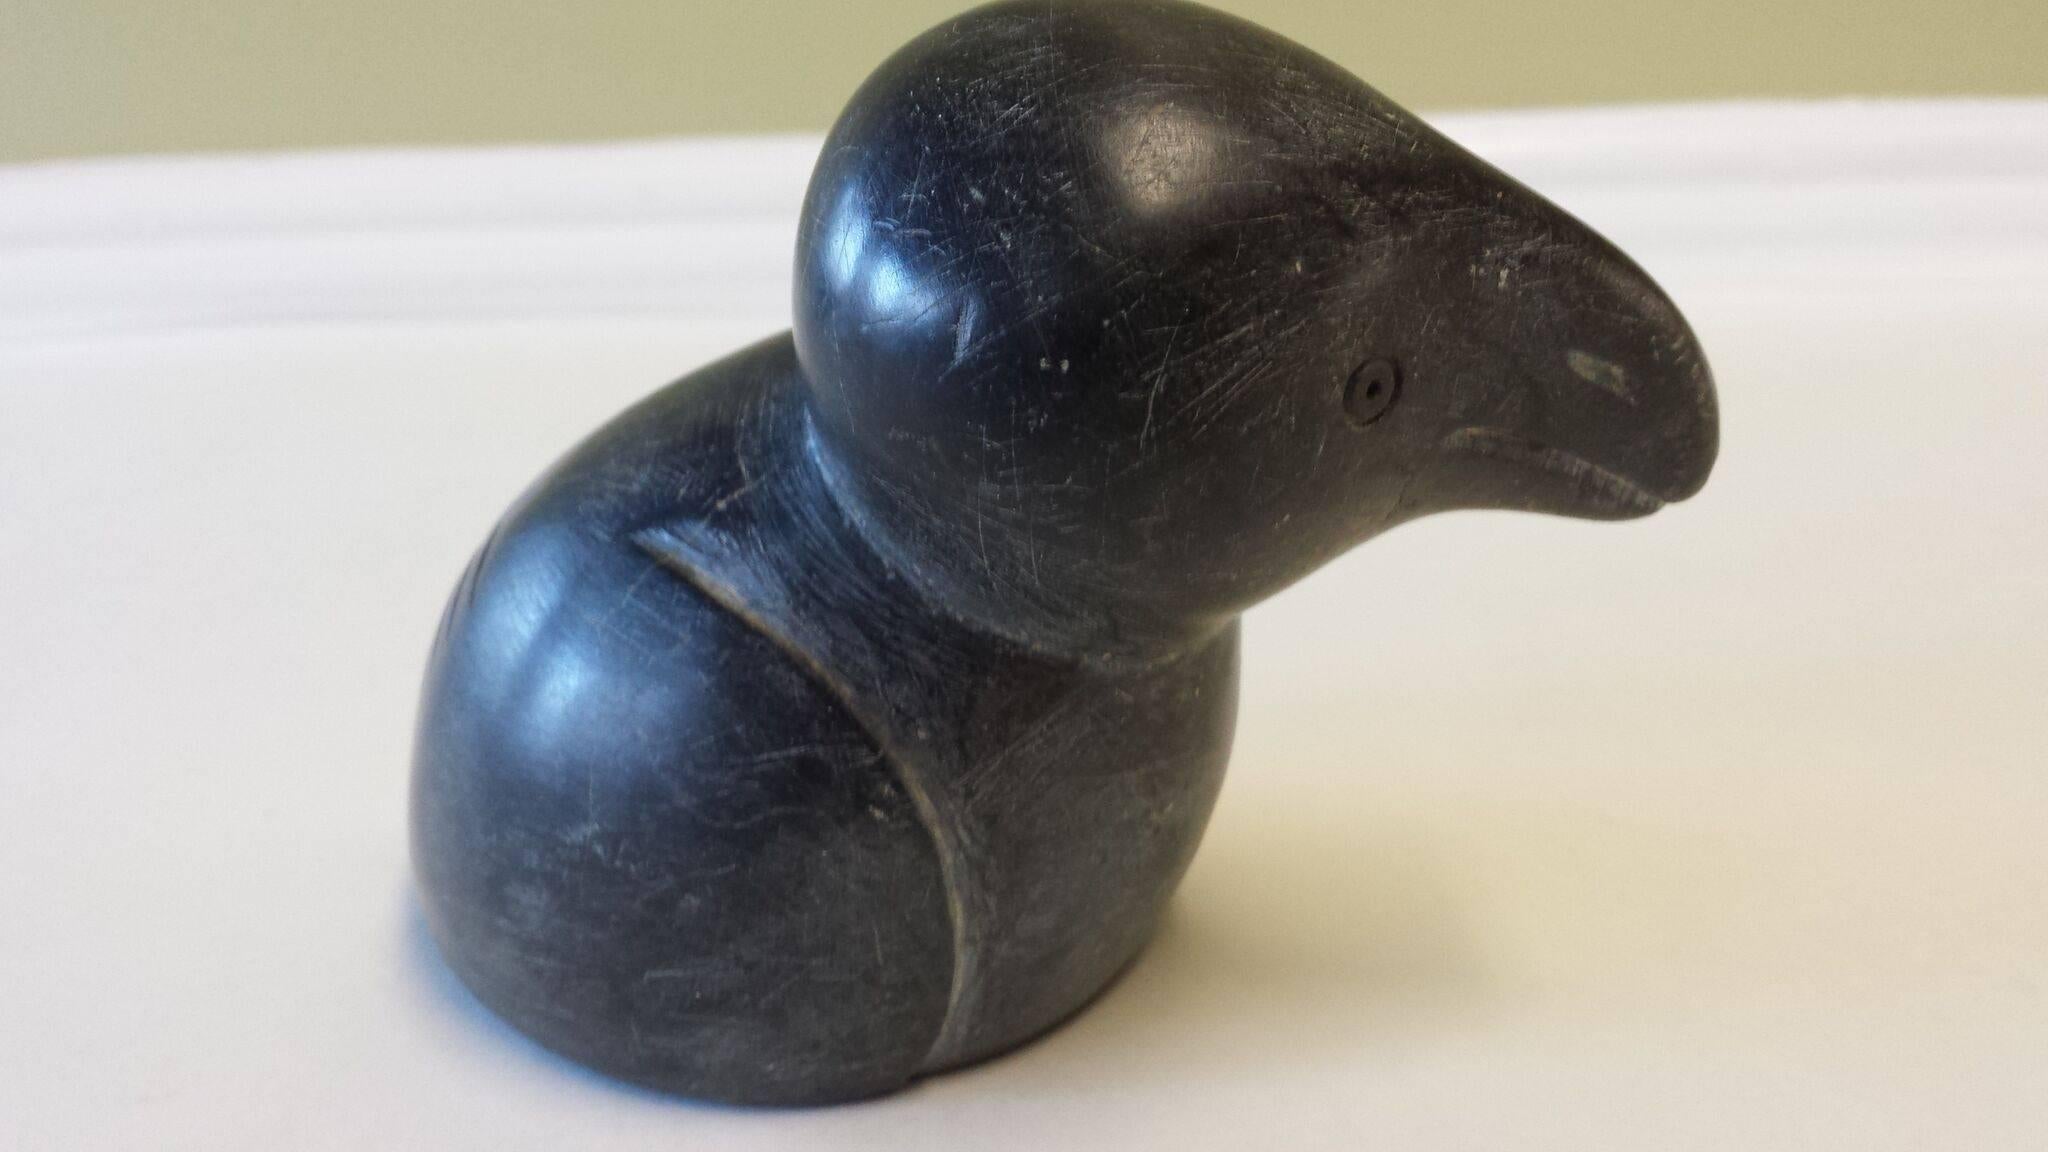 Inuit Mythical Bird Soapstone Carving Signed & Numbered With Italics, A nice Inuit carving with exaggerated features, The carving is done by Daniel Kasudluak, E-9-1699, Born in 1925, Inukjuak. The carving is in nice condition and measures 3